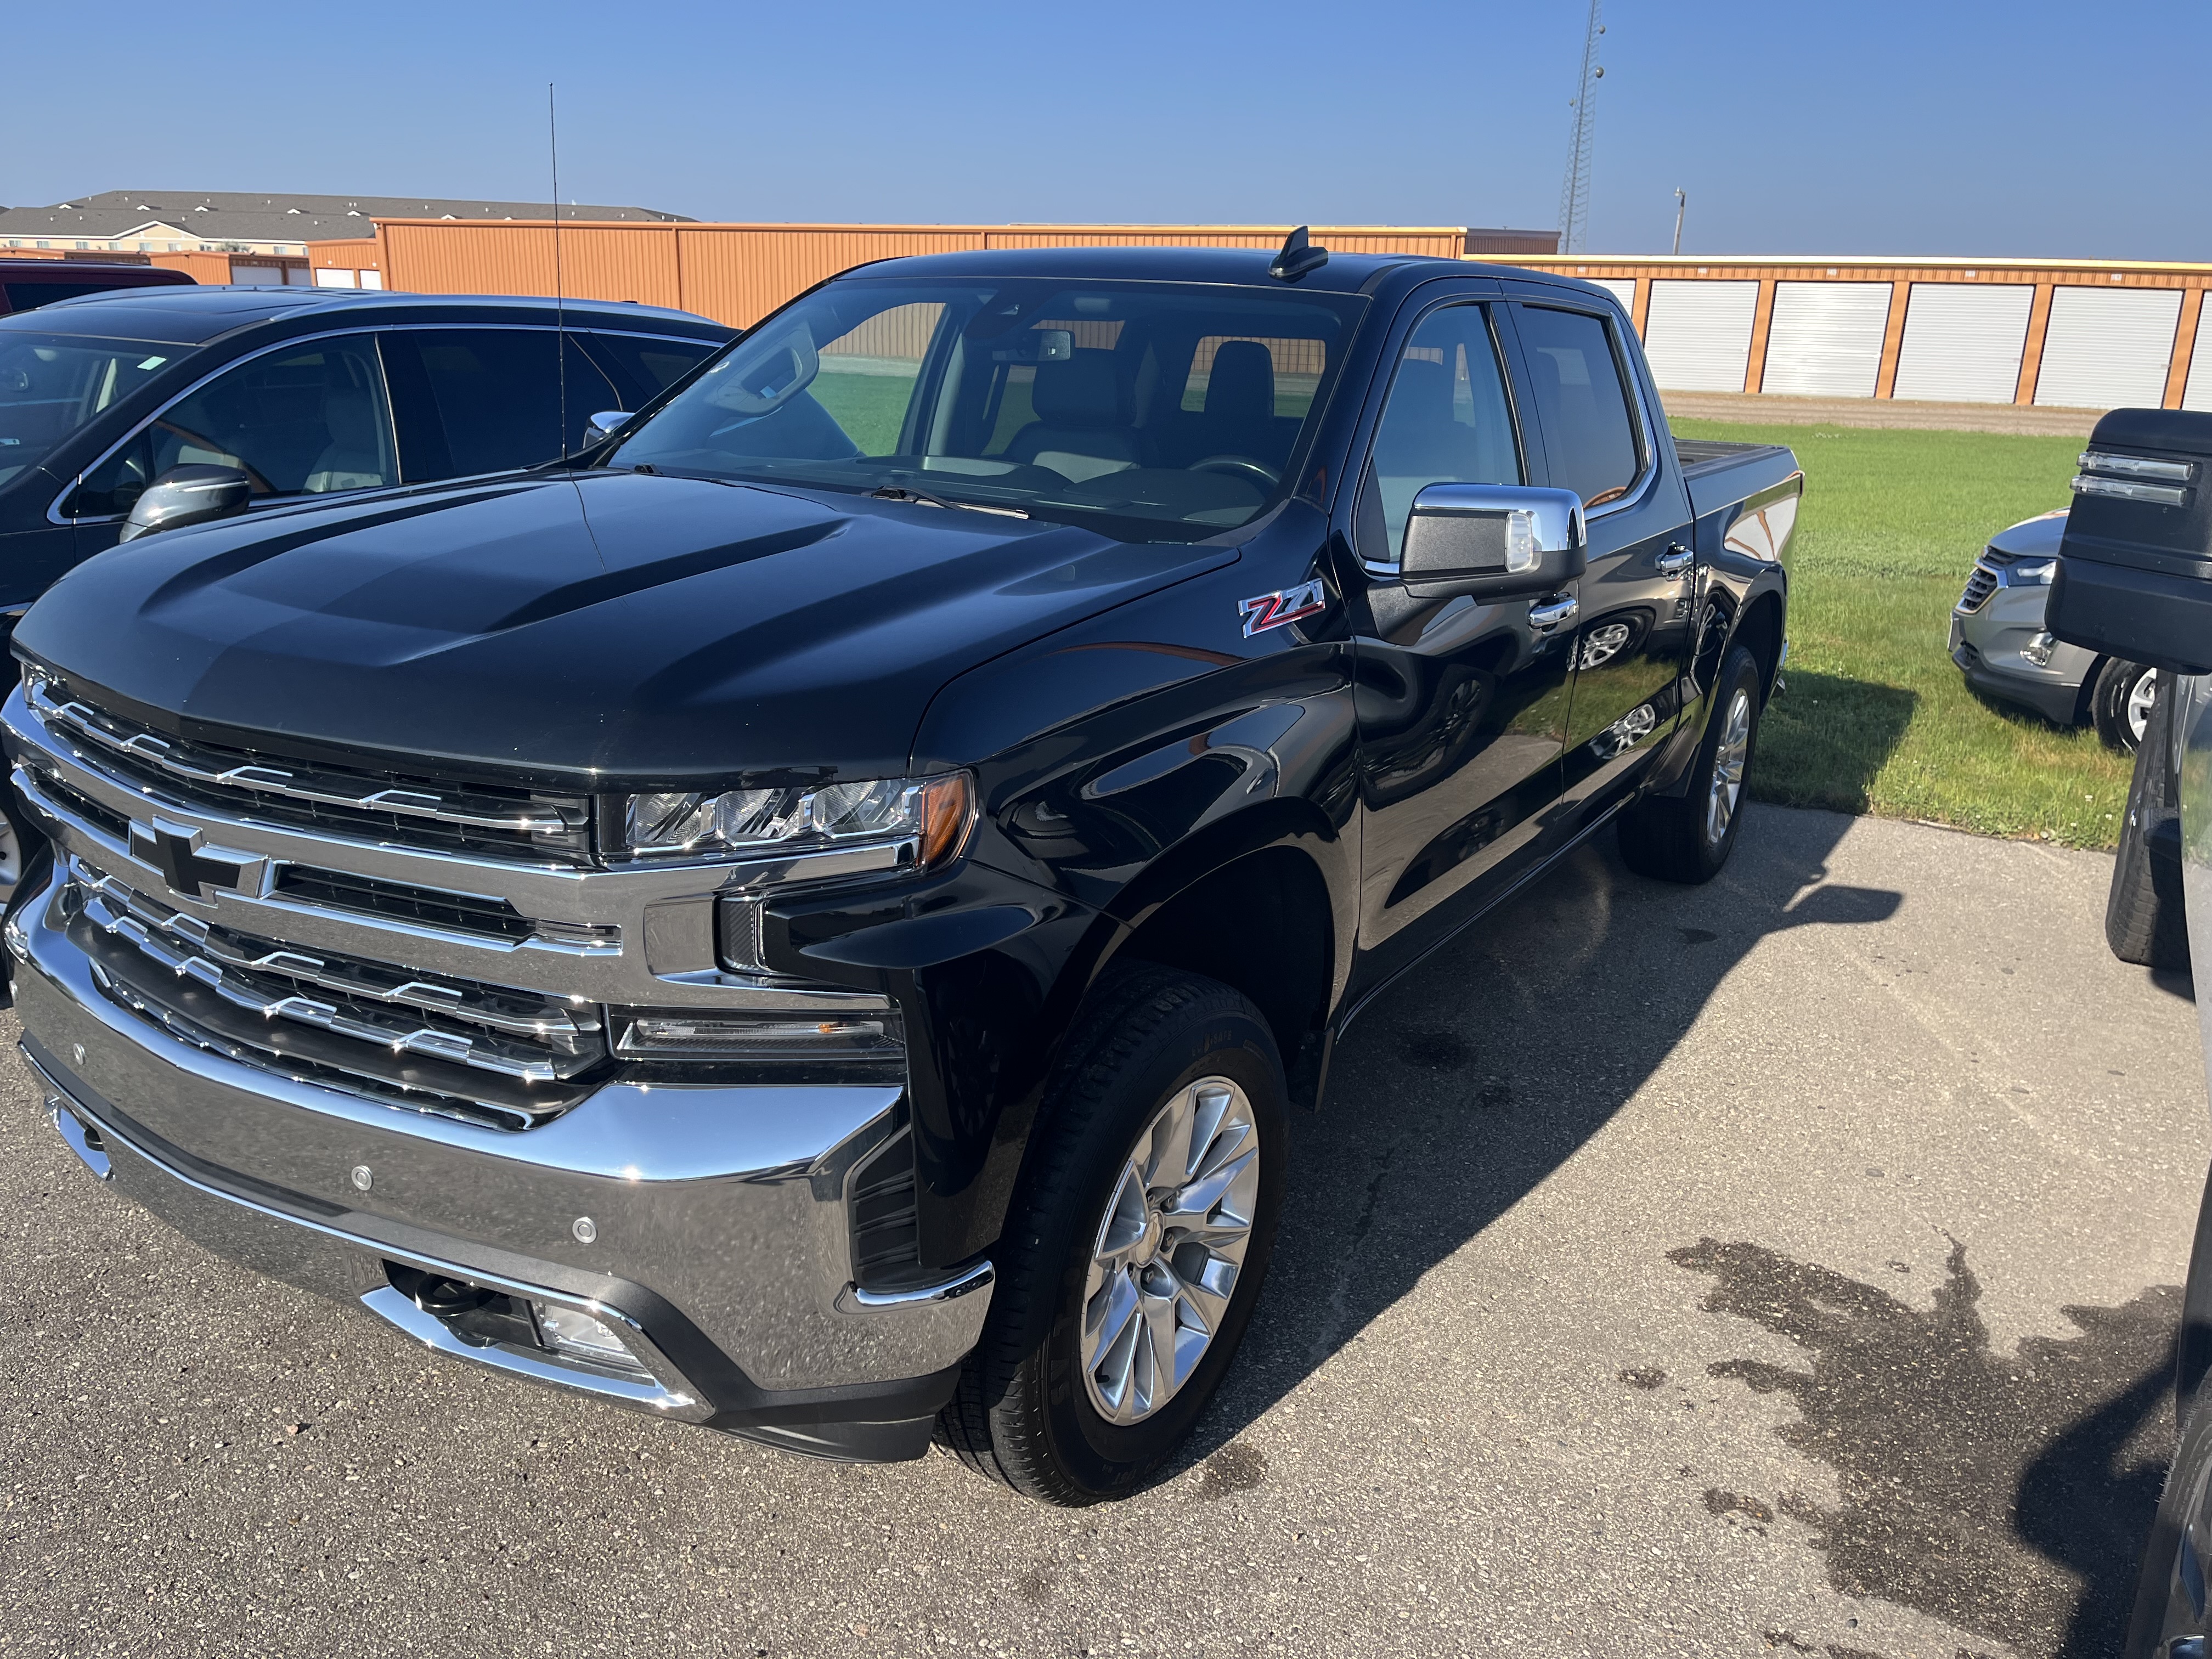 Used 2021 Chevrolet Silverado 1500 LTZ with VIN 3GCUYGEDXMG282373 for sale in Thief River Falls, Minnesota